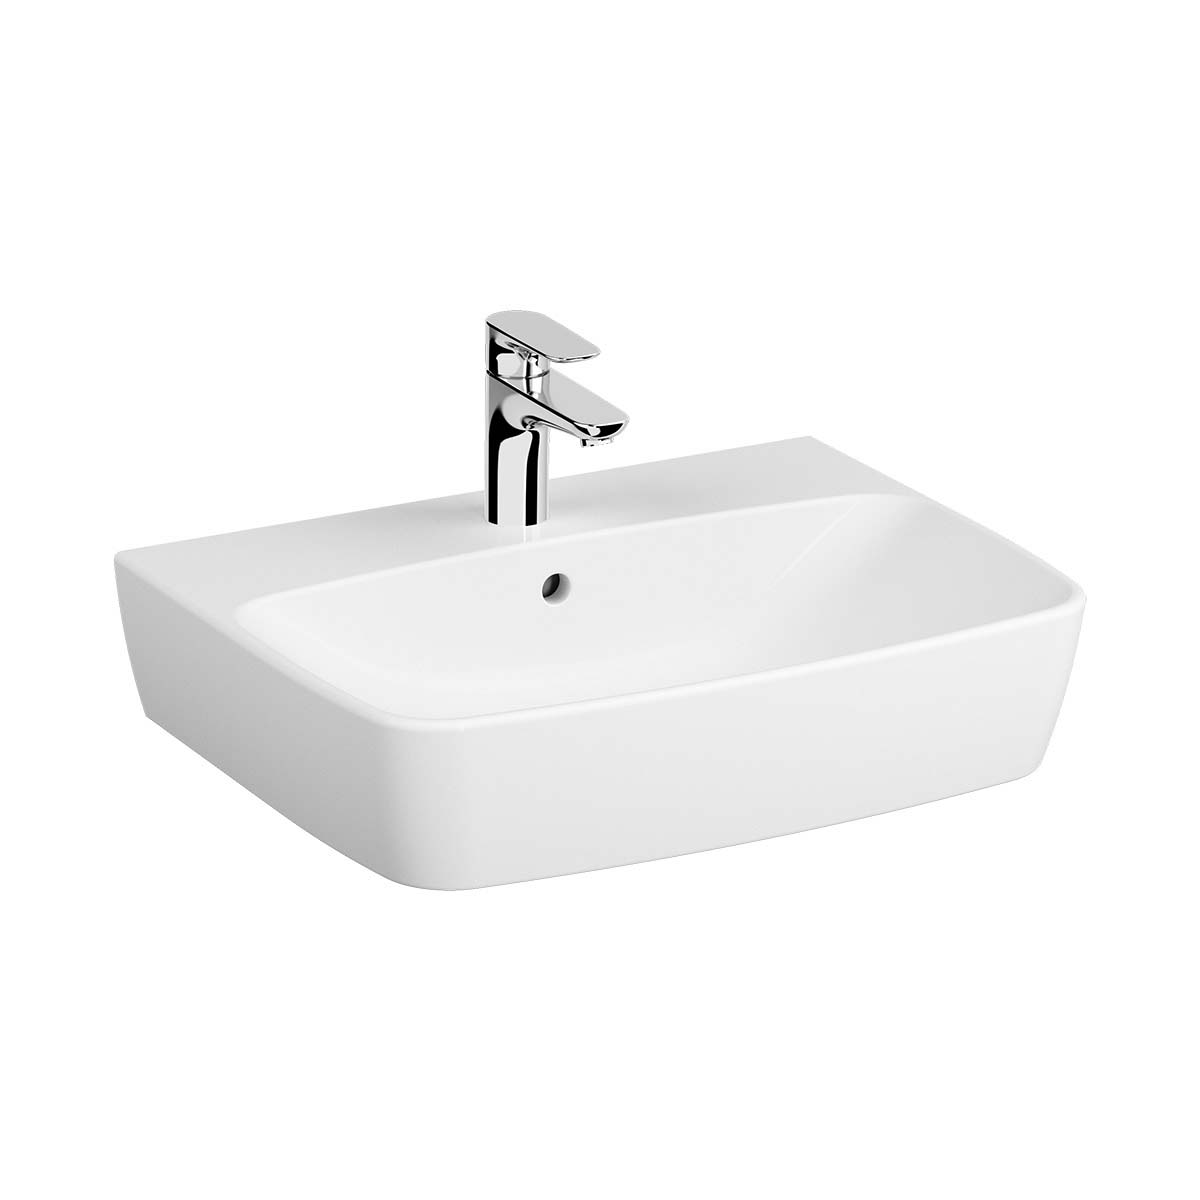 Washbasin, 60 cm, One Tap Hole, With Overflow Hole, For Countertop Use